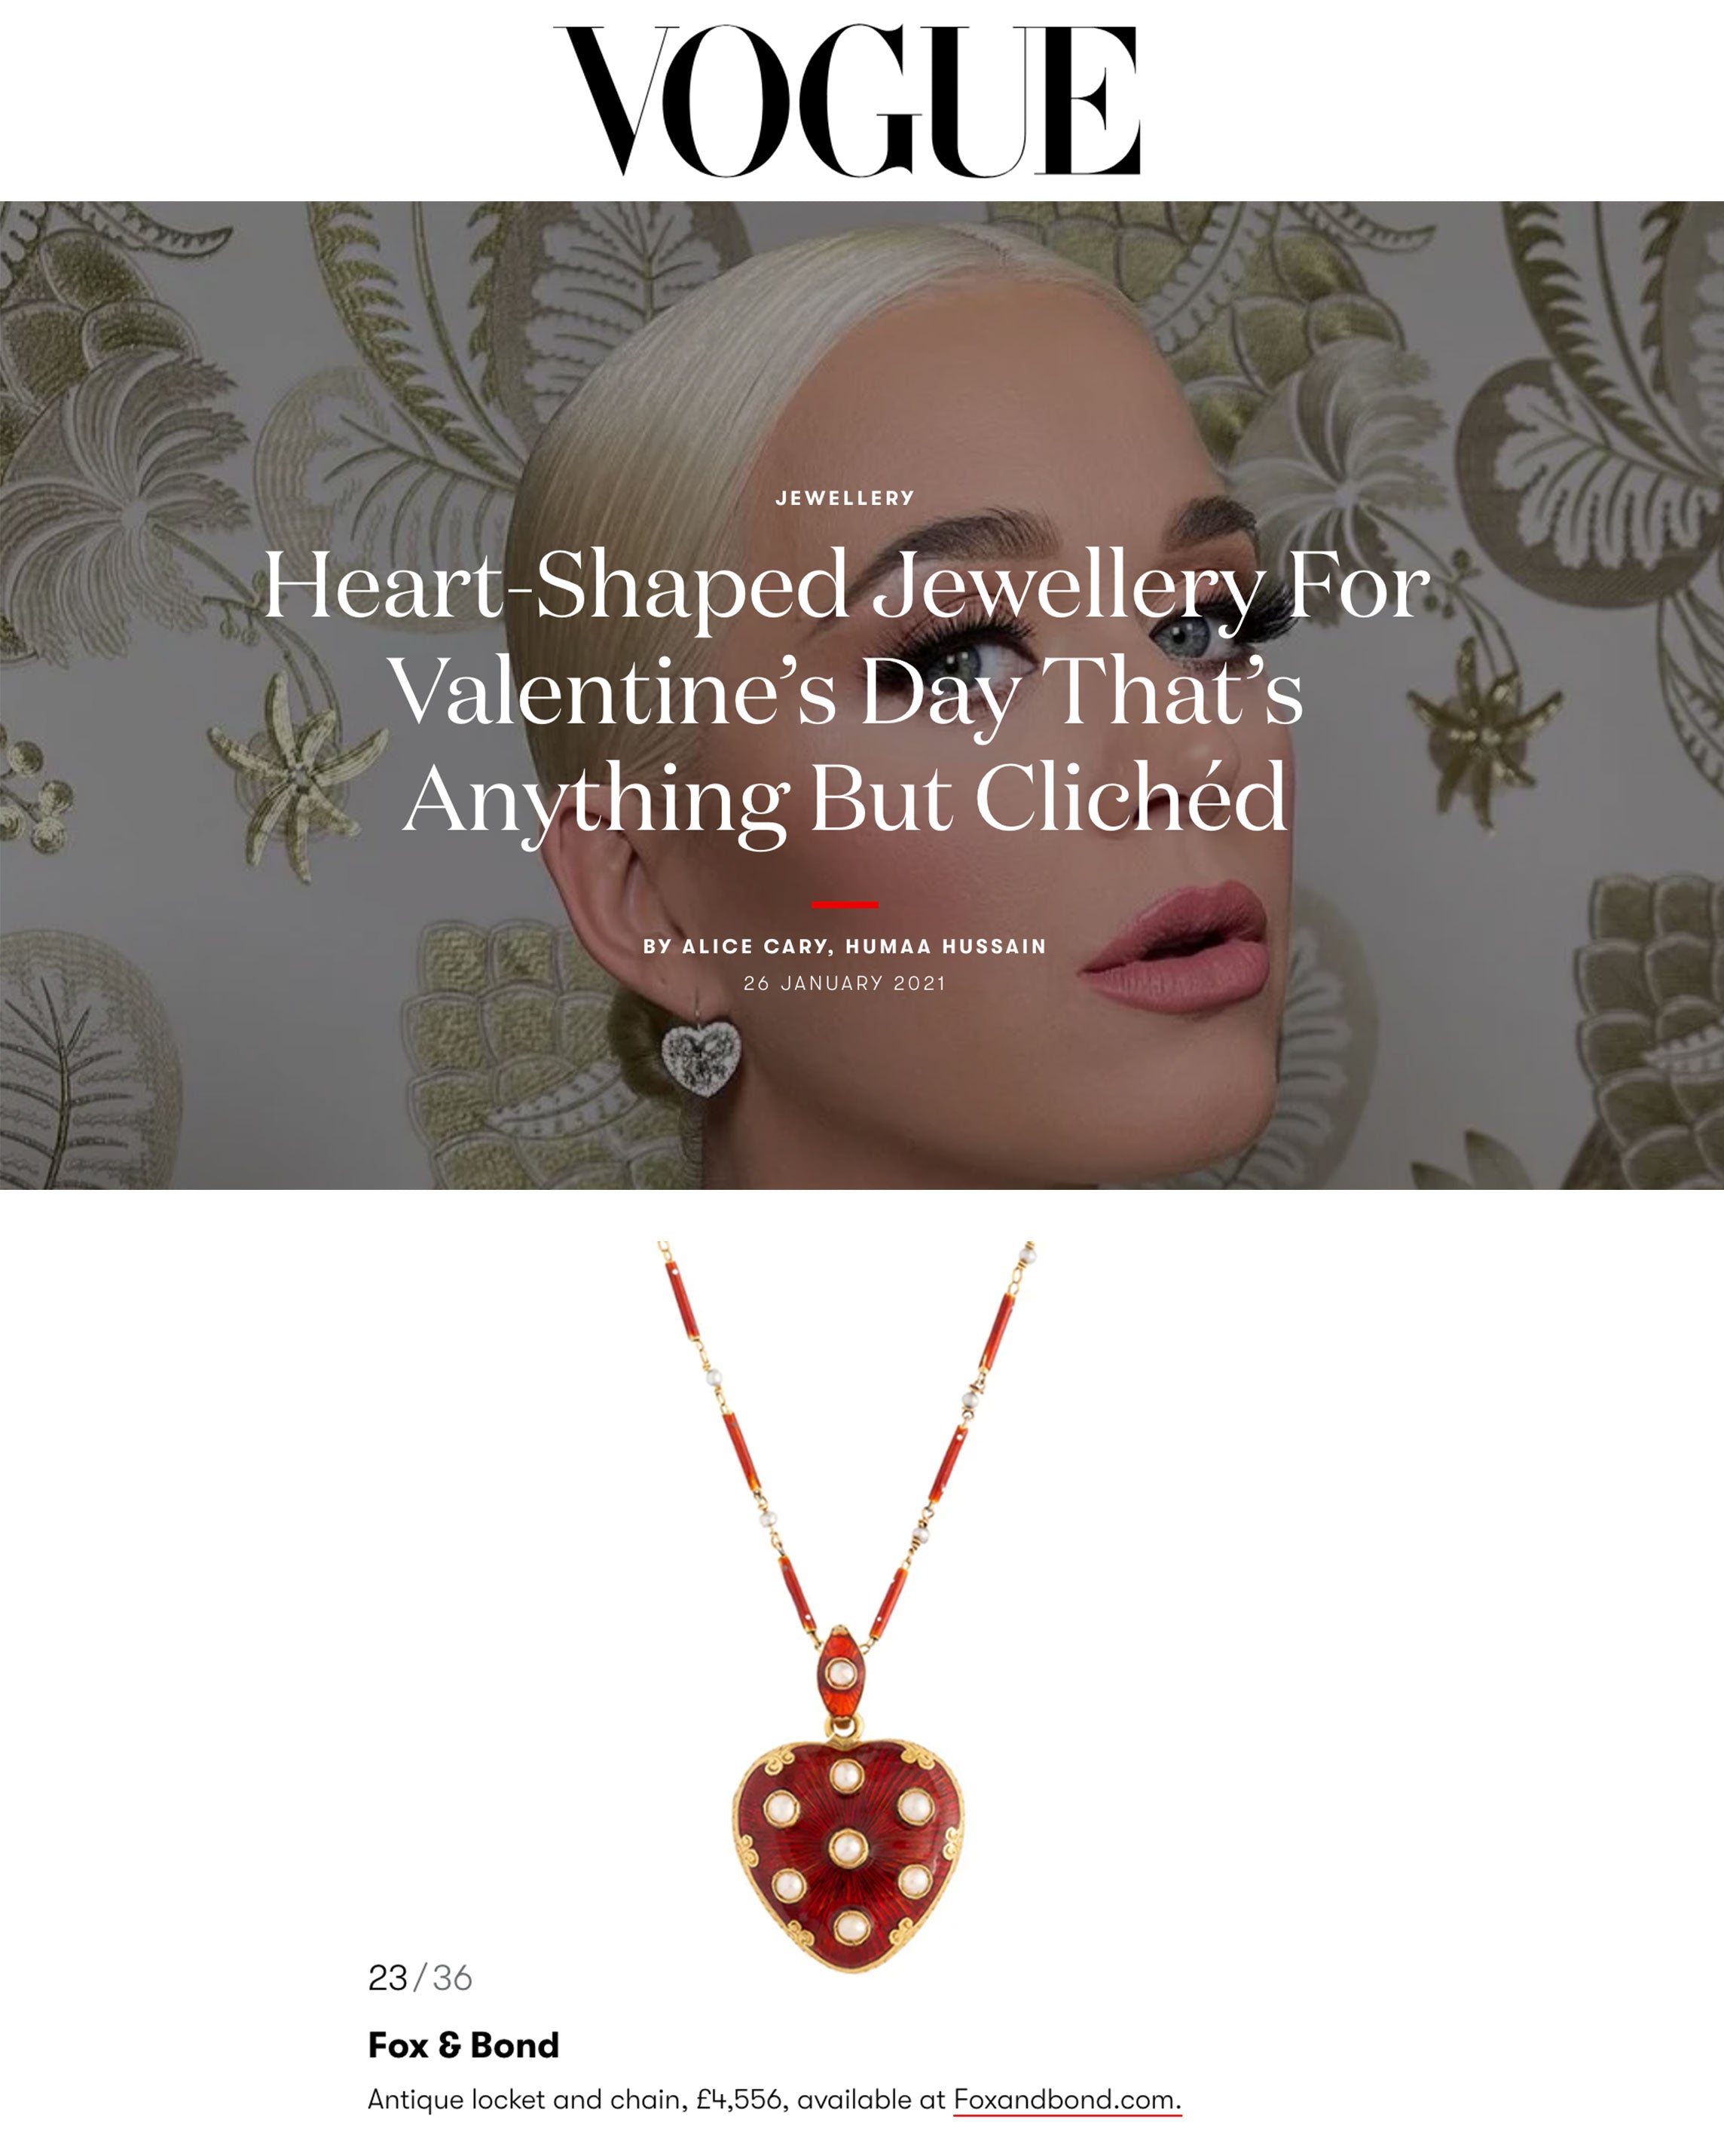 British Vogue: Heart-Shaped Jewellery For Valentine’s Day That’s Anything But Clichéd